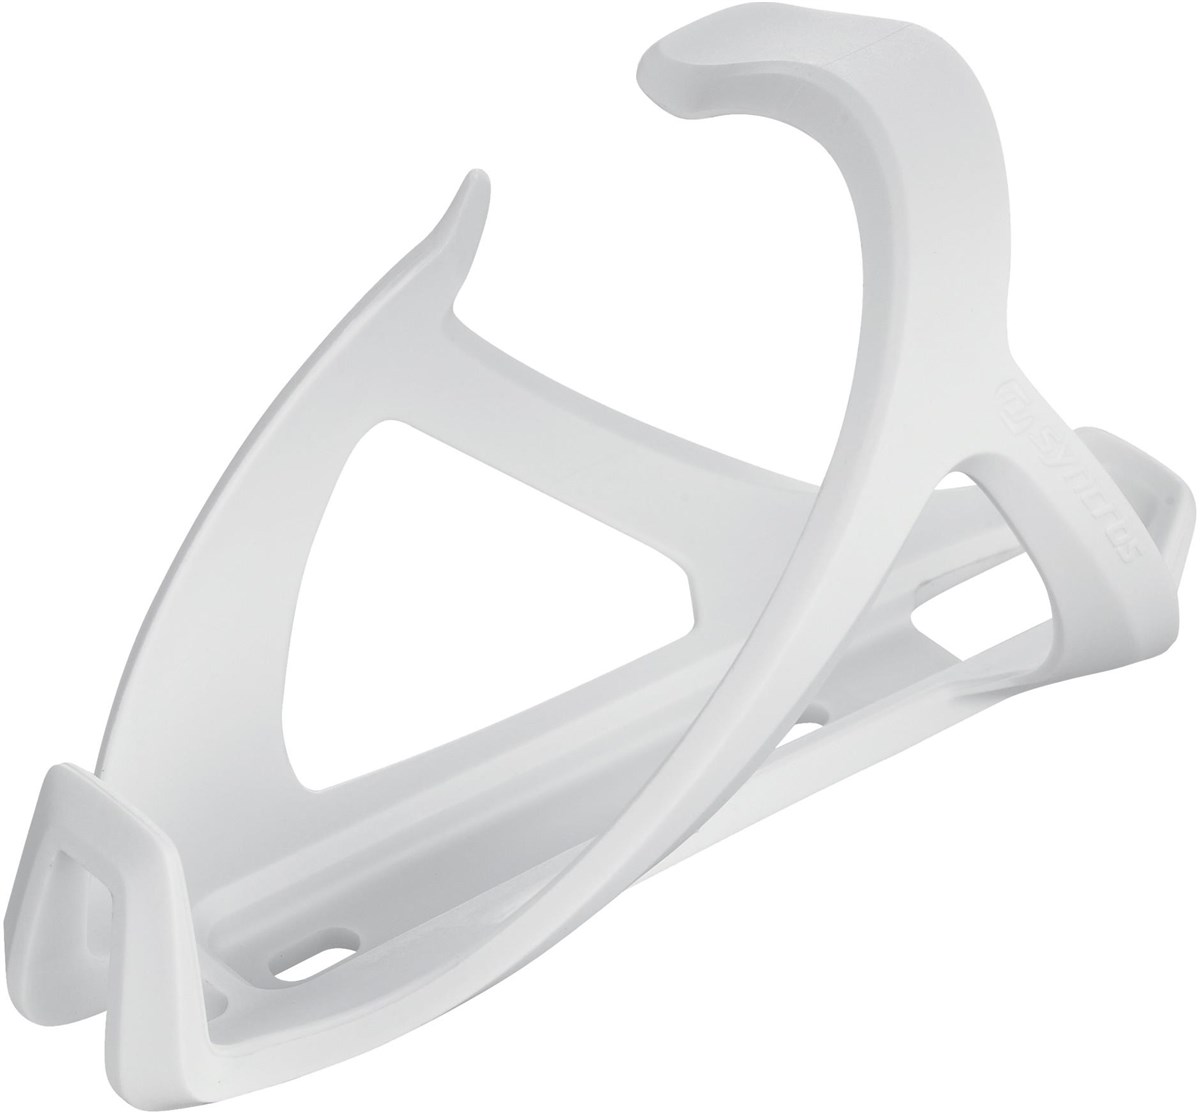 Syncros Tailor Cage 3.0 Left Bottle Cage